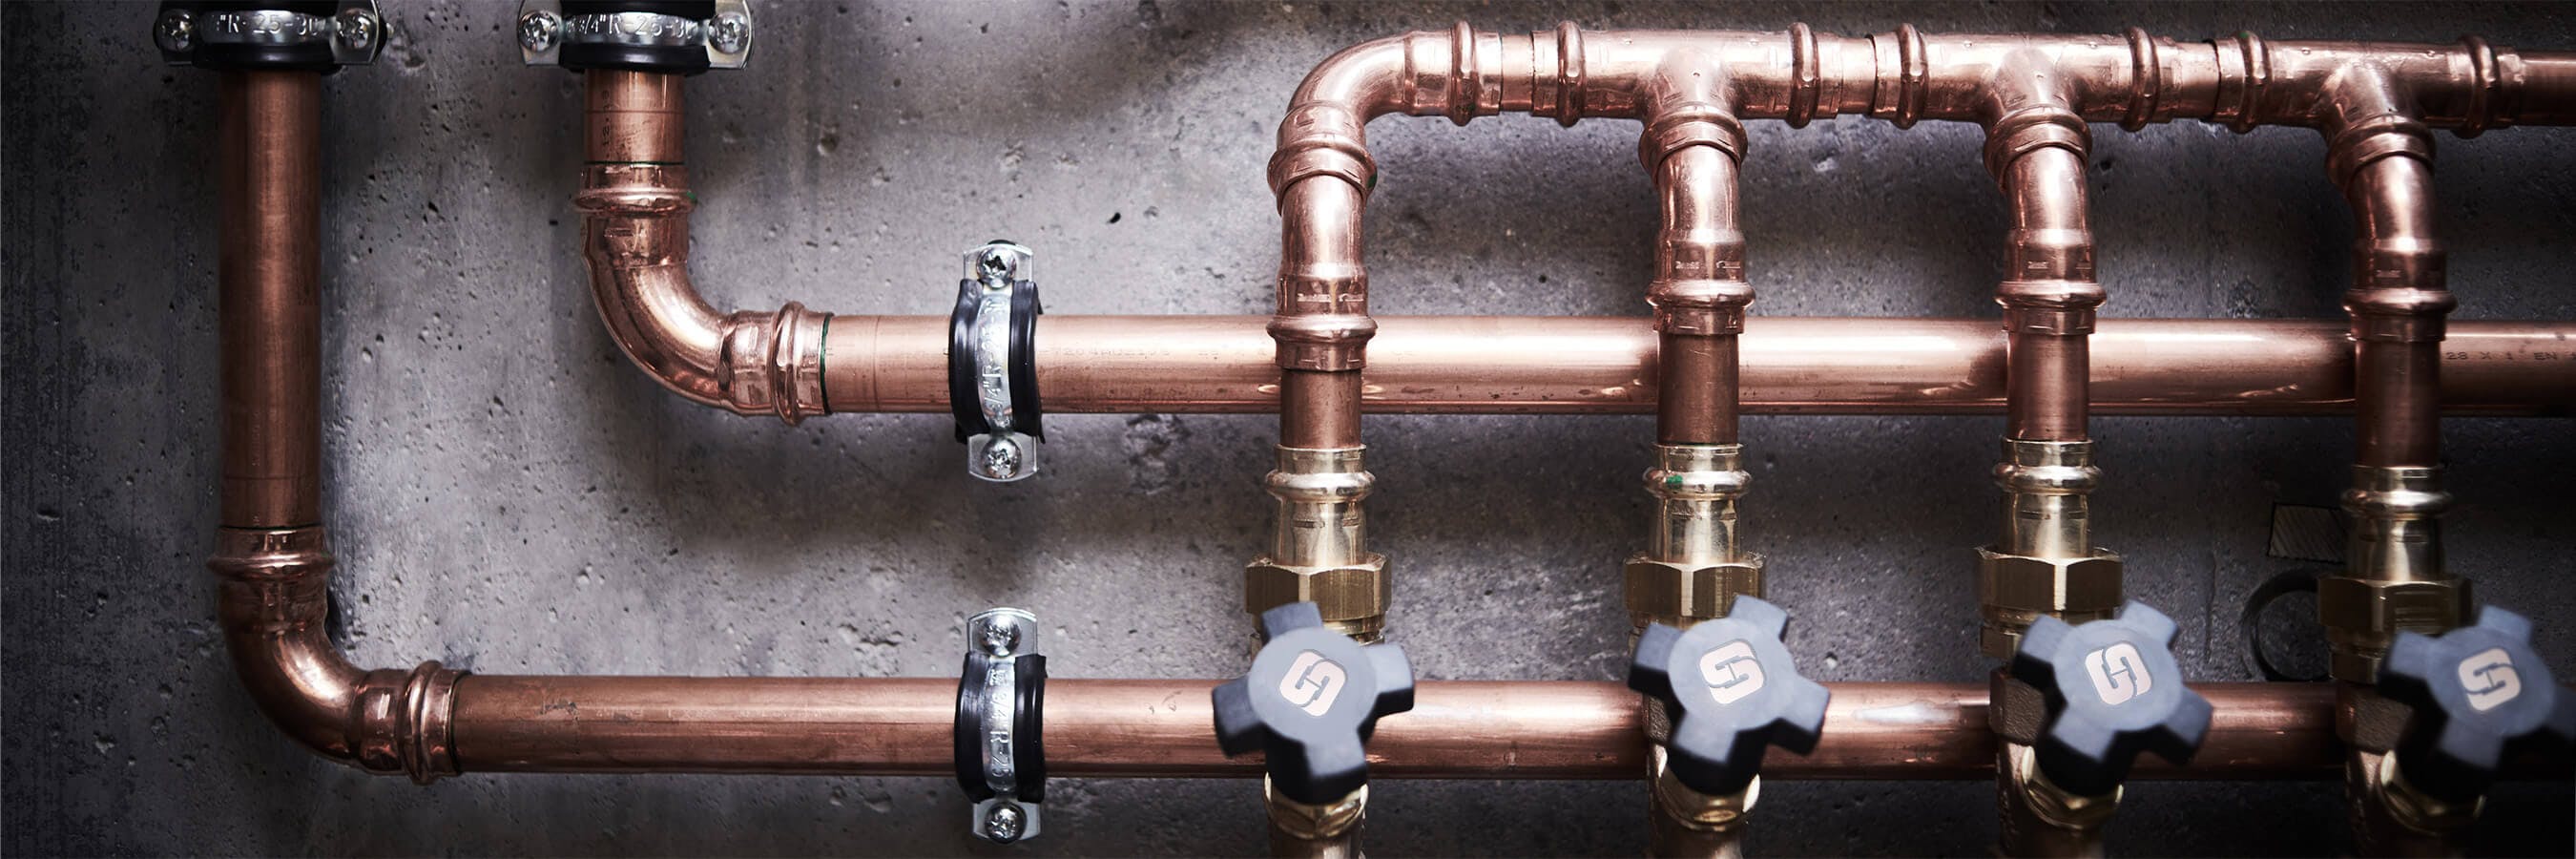 Pipes for compliance reporting